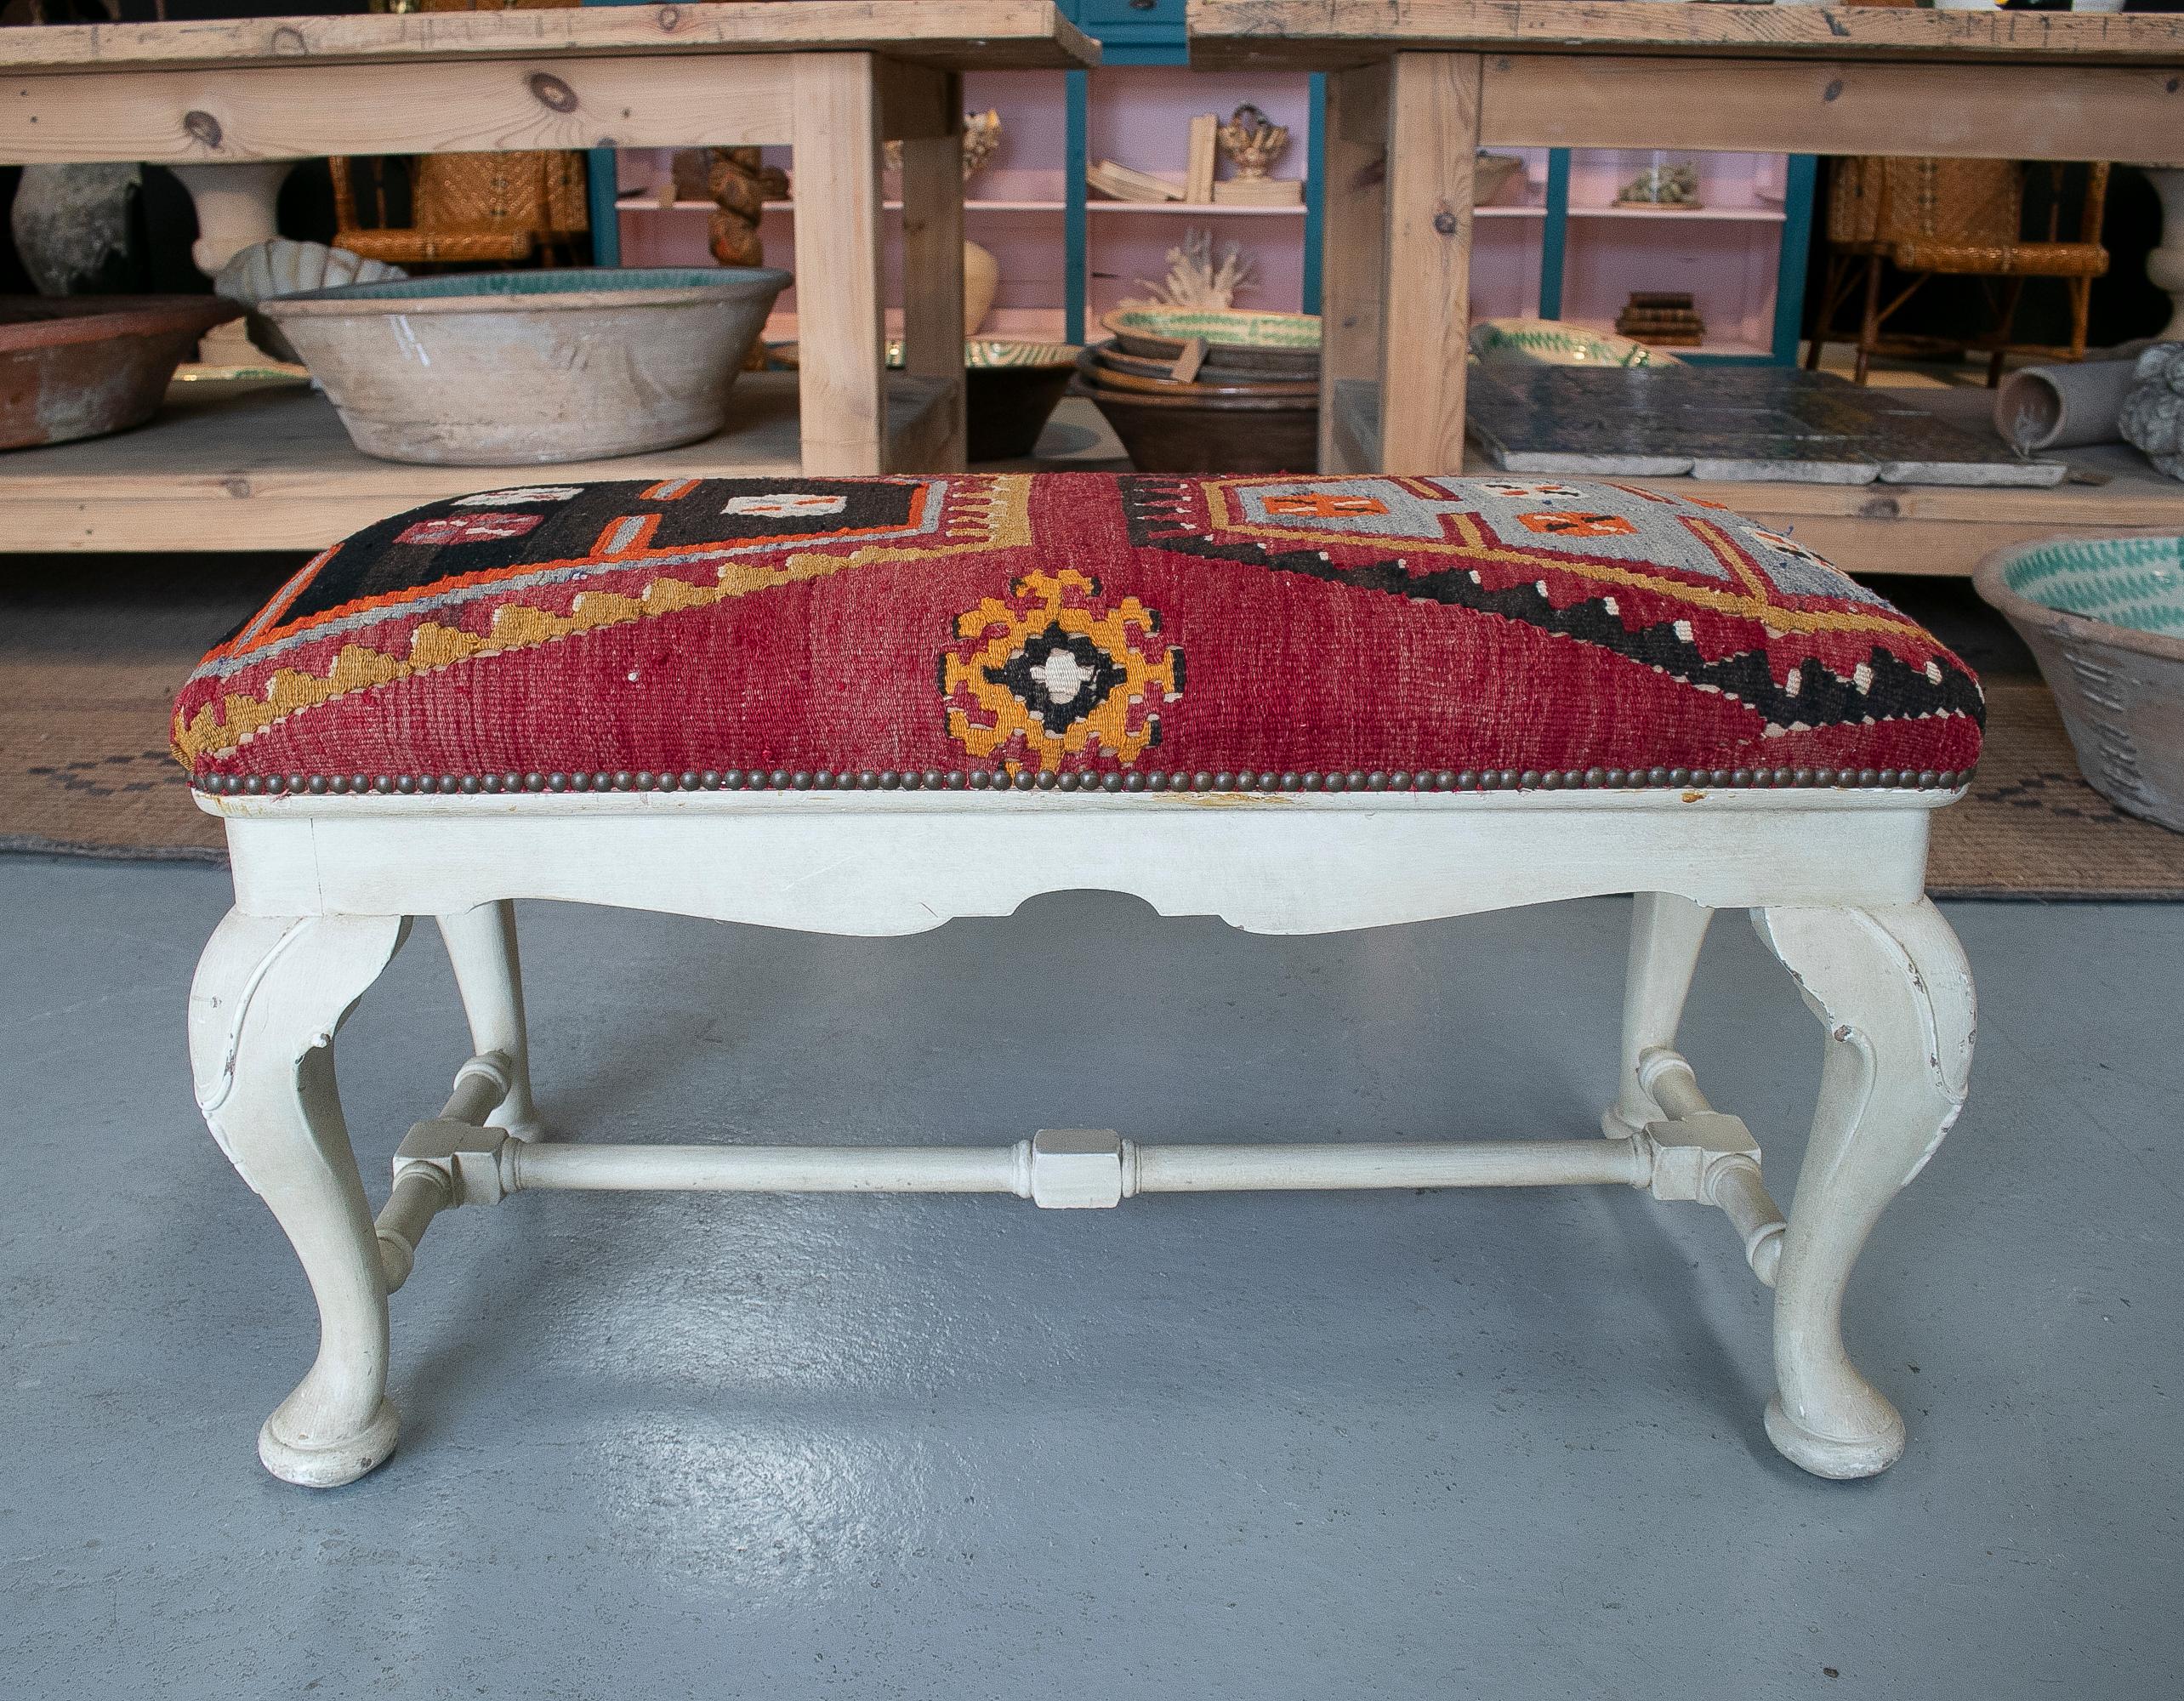 Vintage 1950s Spanish tapestry-woven kilim upholstered two-seat bench.